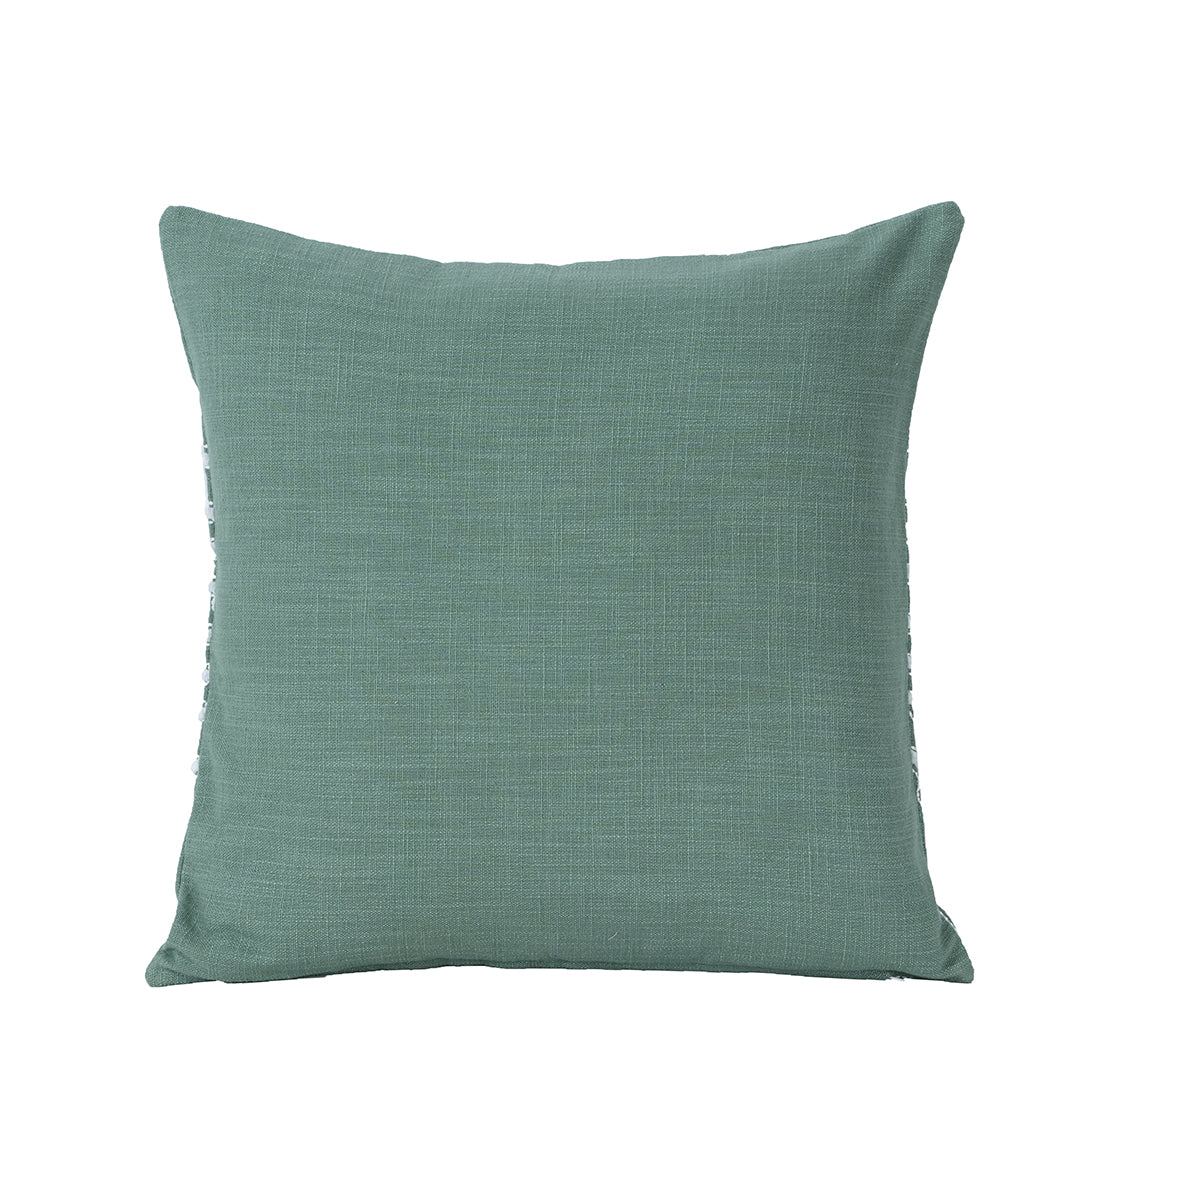 Tranquil Essence Alligator Reflect Embroidered 100% Cotton Green Cushion Cover